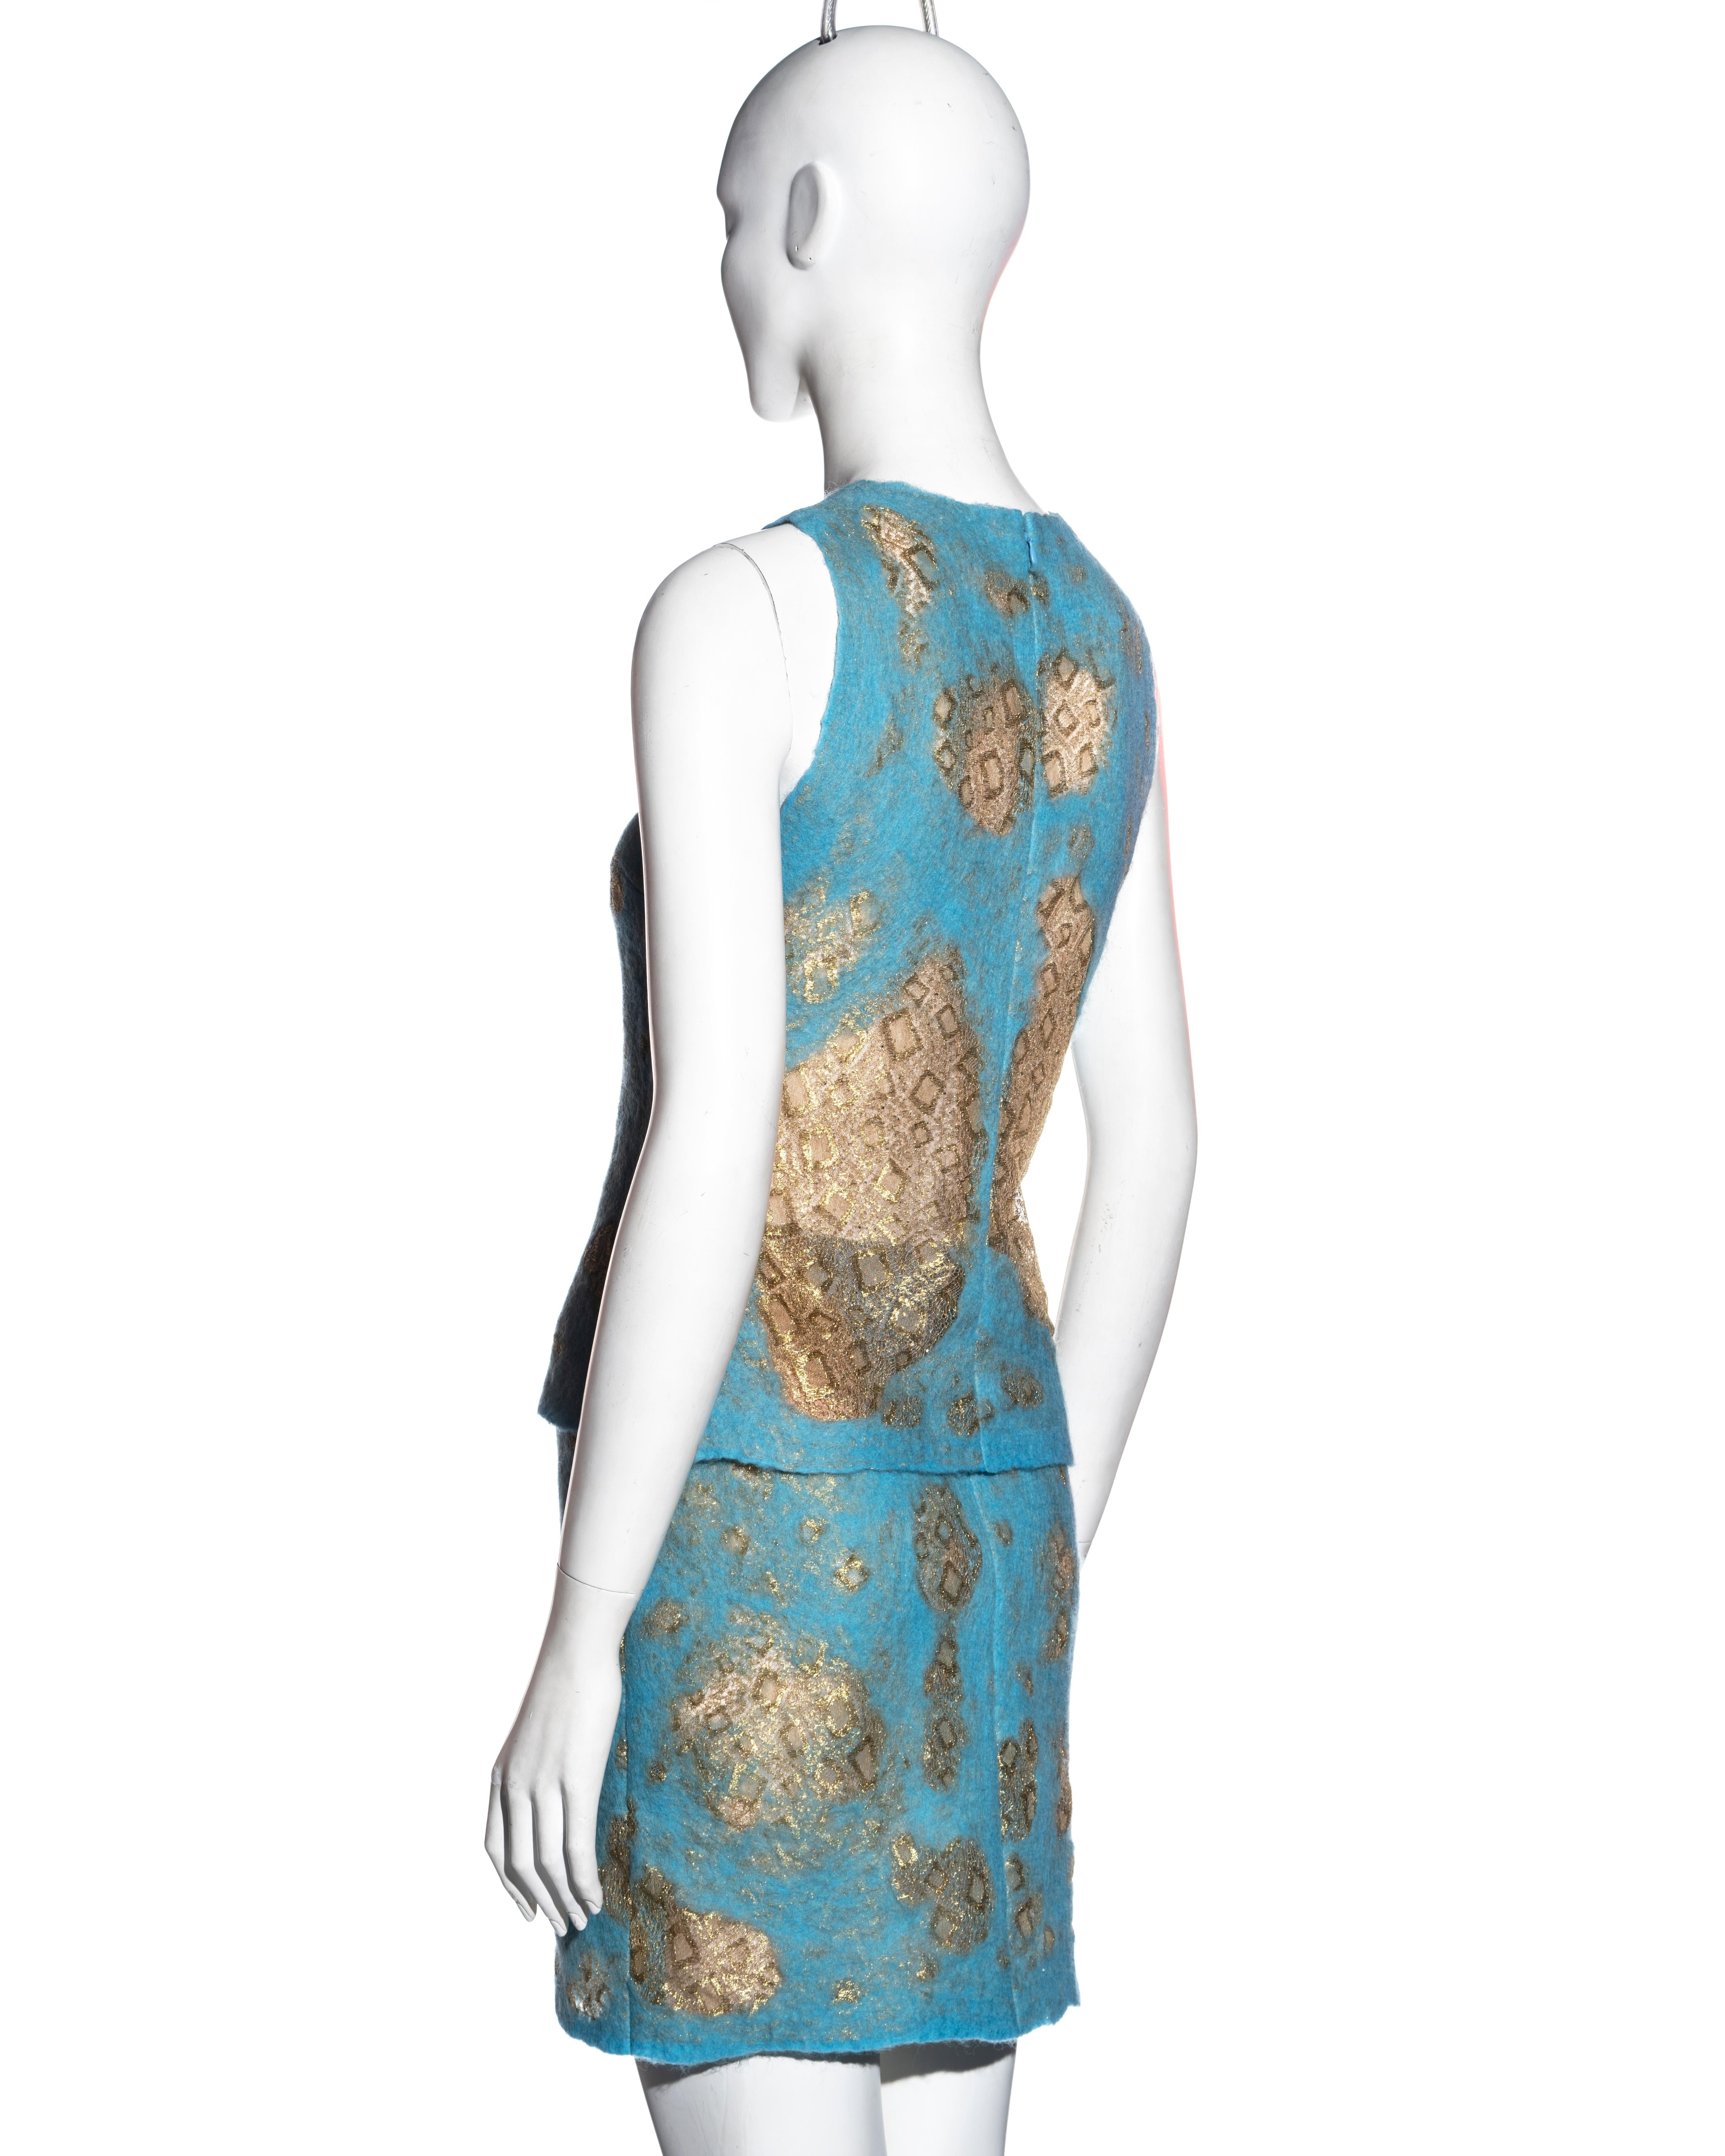 Gianni Versace aqua blue felted wool and gold lace top and skirt set, ss 1999 For Sale 1